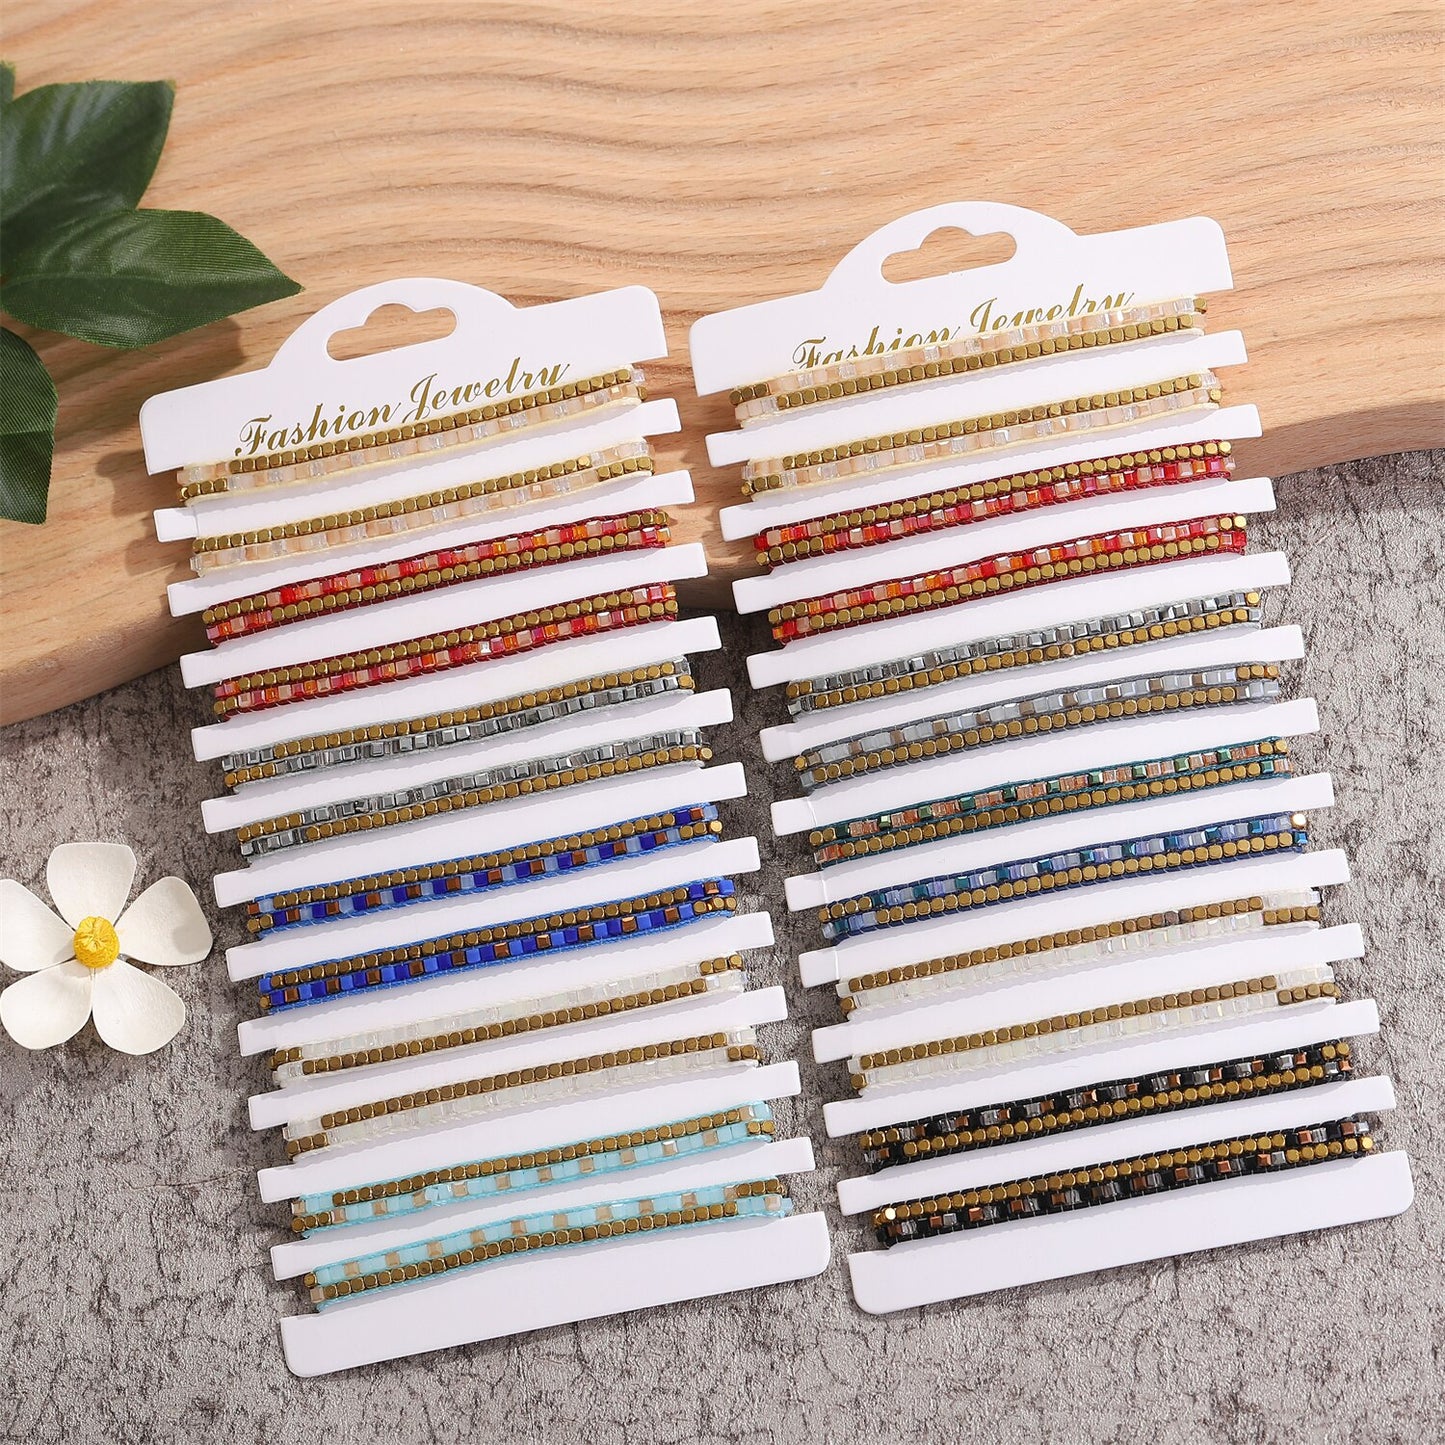 Boho 12pcs/lot Seed Beads Braided Bracelets for Women Adjustable Rope Chain Anklets Beach Handmade Wide Wristband Cuff Jewelry